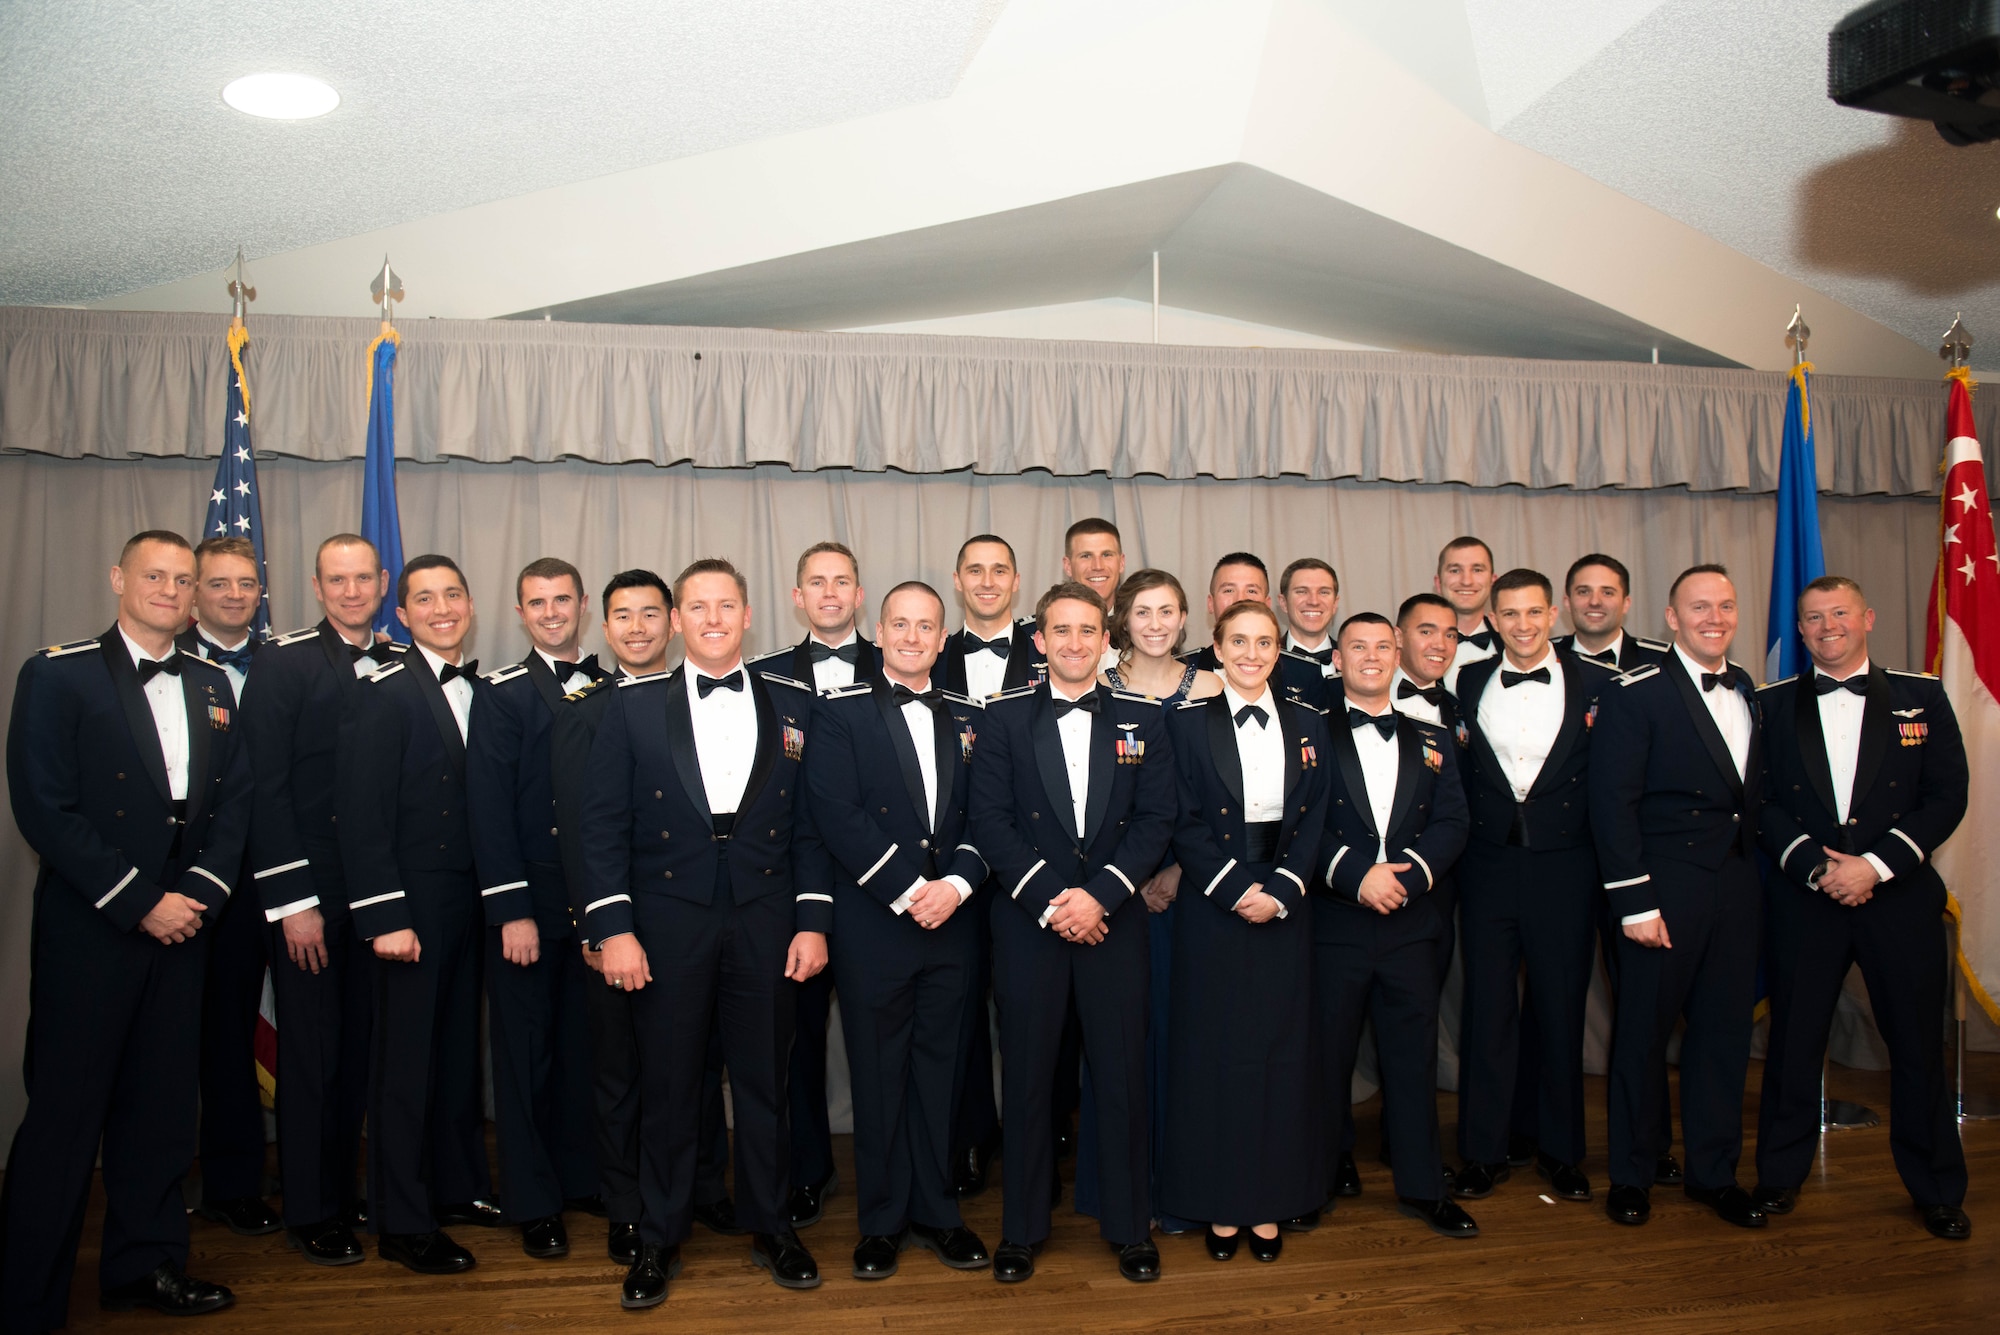 United States Air Force Test Pilot School Class 18A stood proudly before friends, families, base leadership and fellow testers at Club Muroc as they received their Master of Science Degree in Flight Test Engineering Dec. 7. (U.S. Air Force photo by Joe Jones)